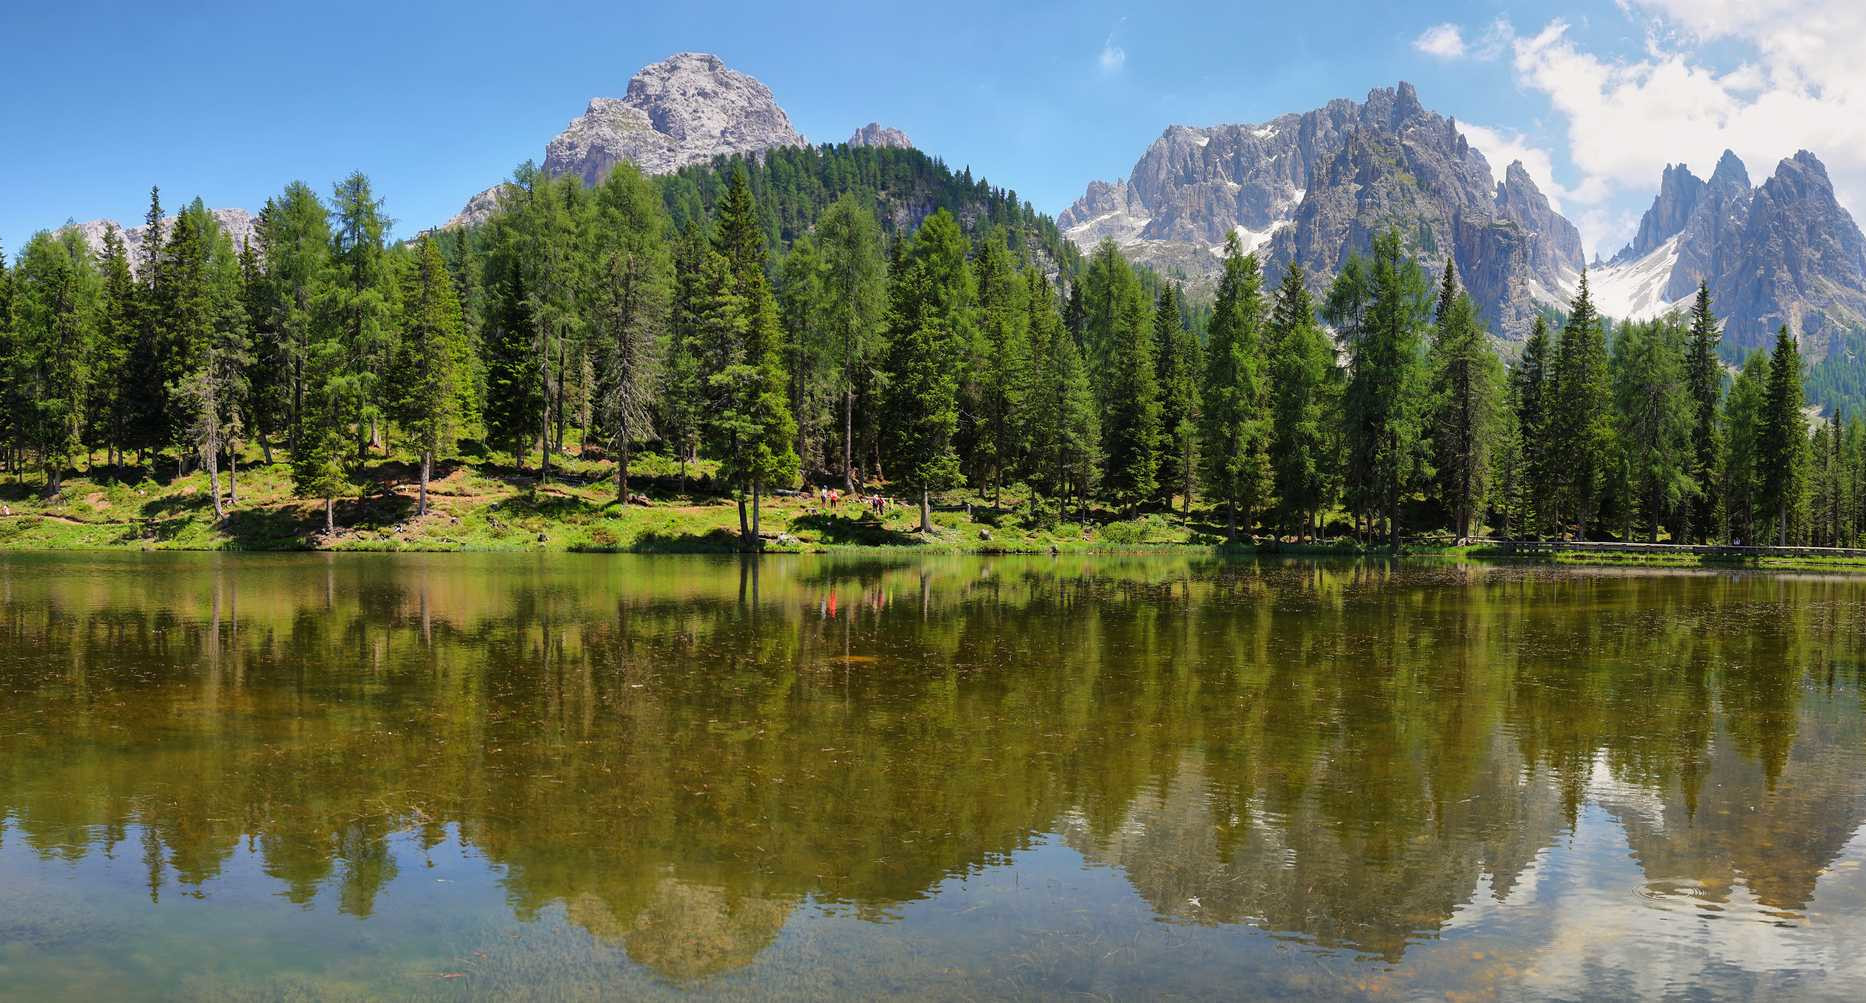  A serene lake reflects the towering mountains and lush greenery, showcasing the beauty of nature, while the search query is about tools for managing PPC campaigns with automation, machine learning, personalization, multichannel measurement, and predictive analytics.